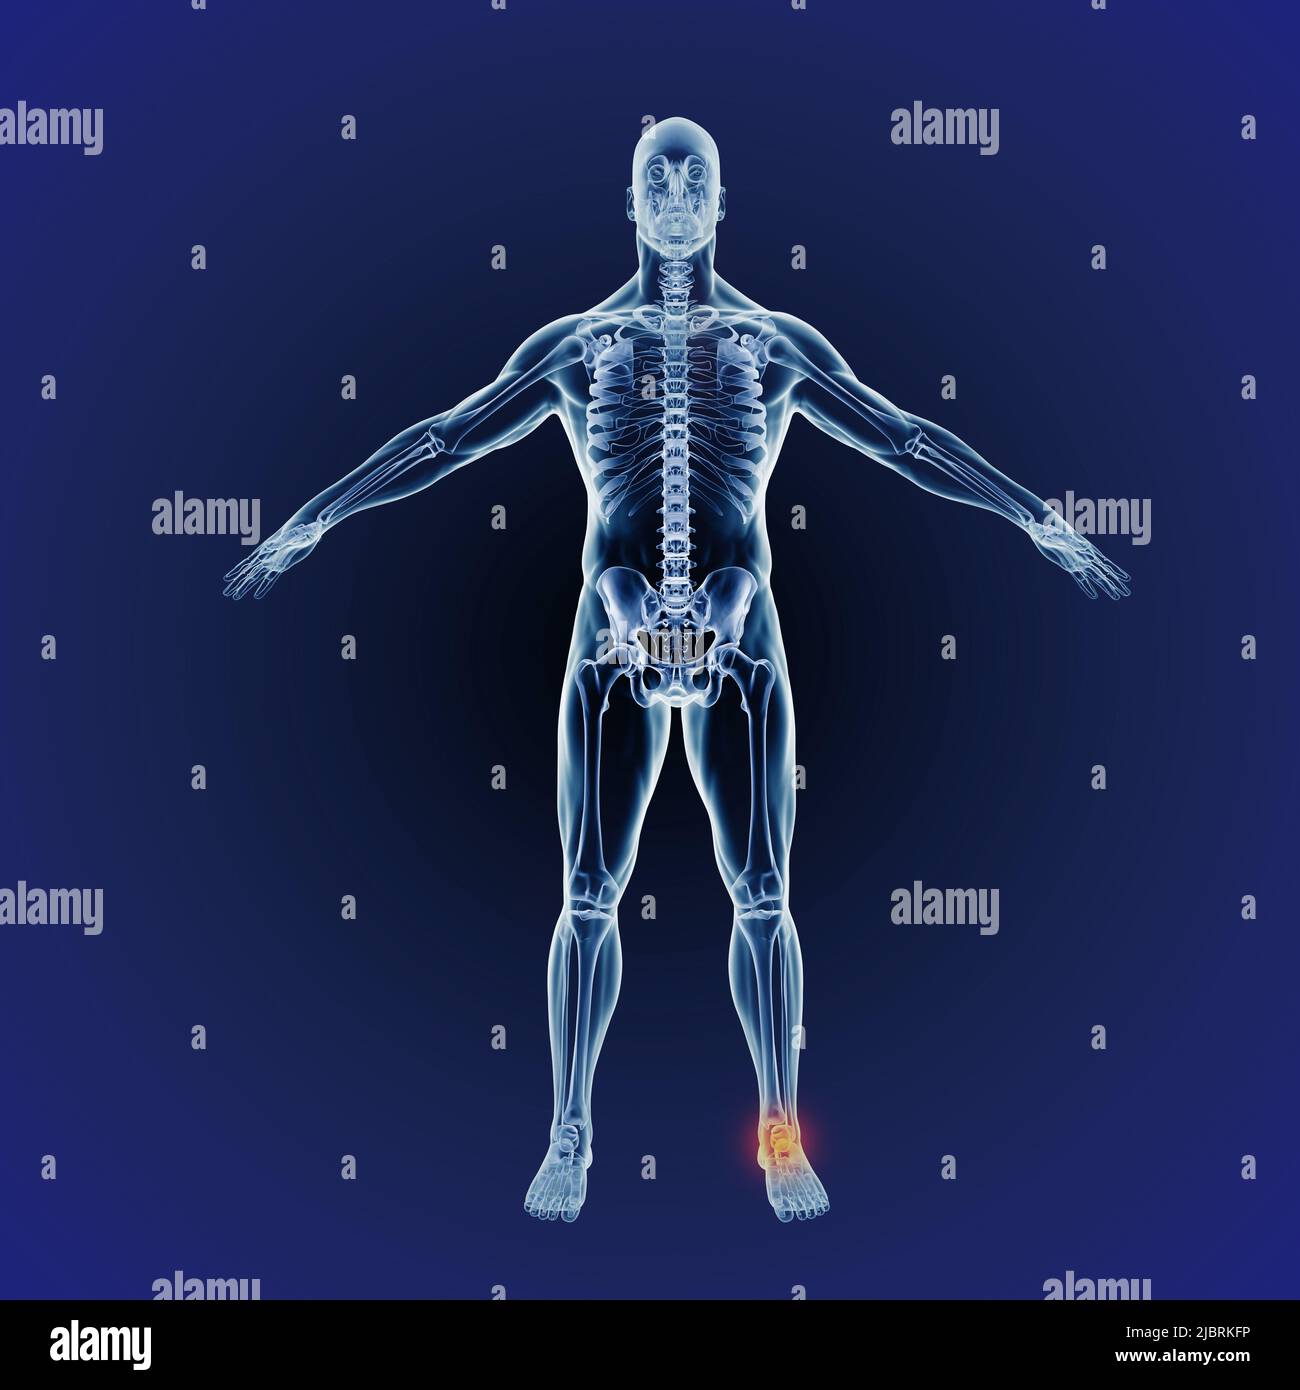 Angle and joint pains. When inflammation strikes. A full length cgi representation of the human body indicating the skeletal structure. Stock Photo